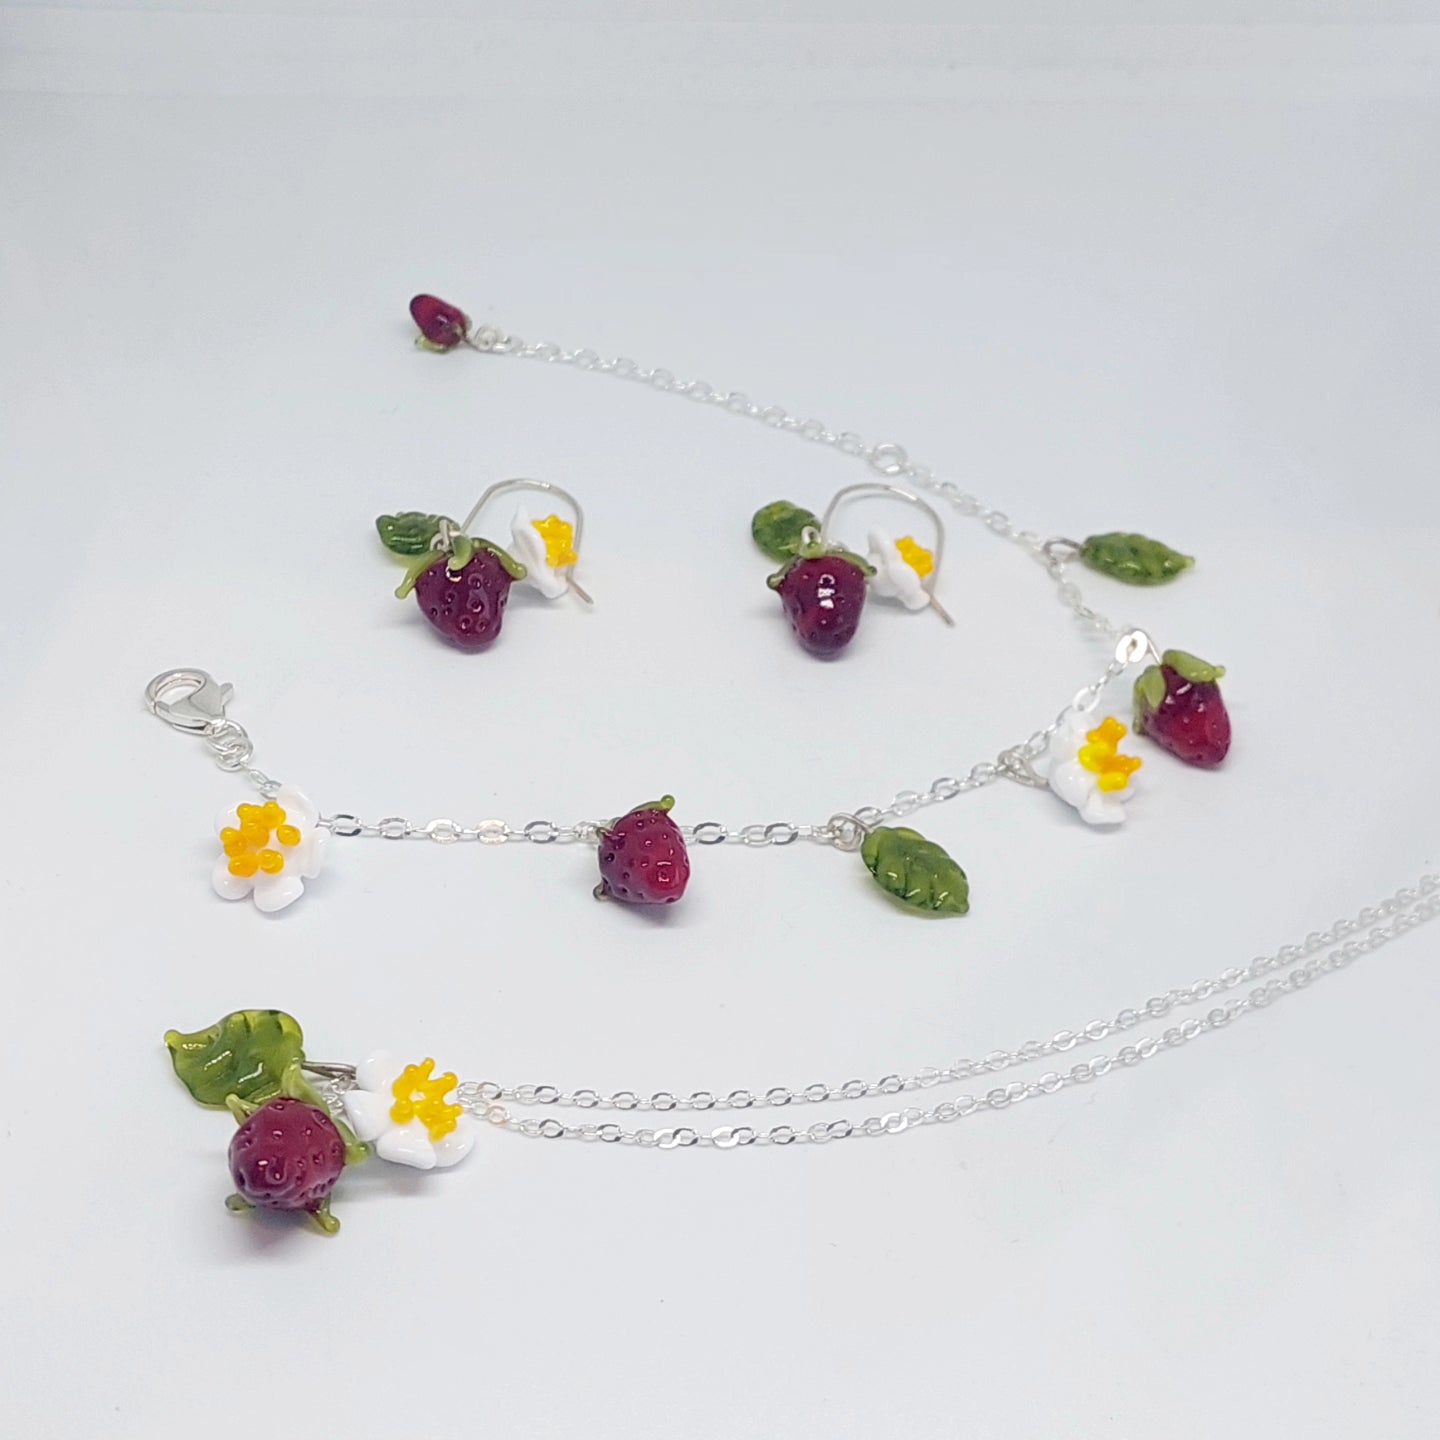 NEW!! Glass Art - Small Strawberry Cluster Necklace